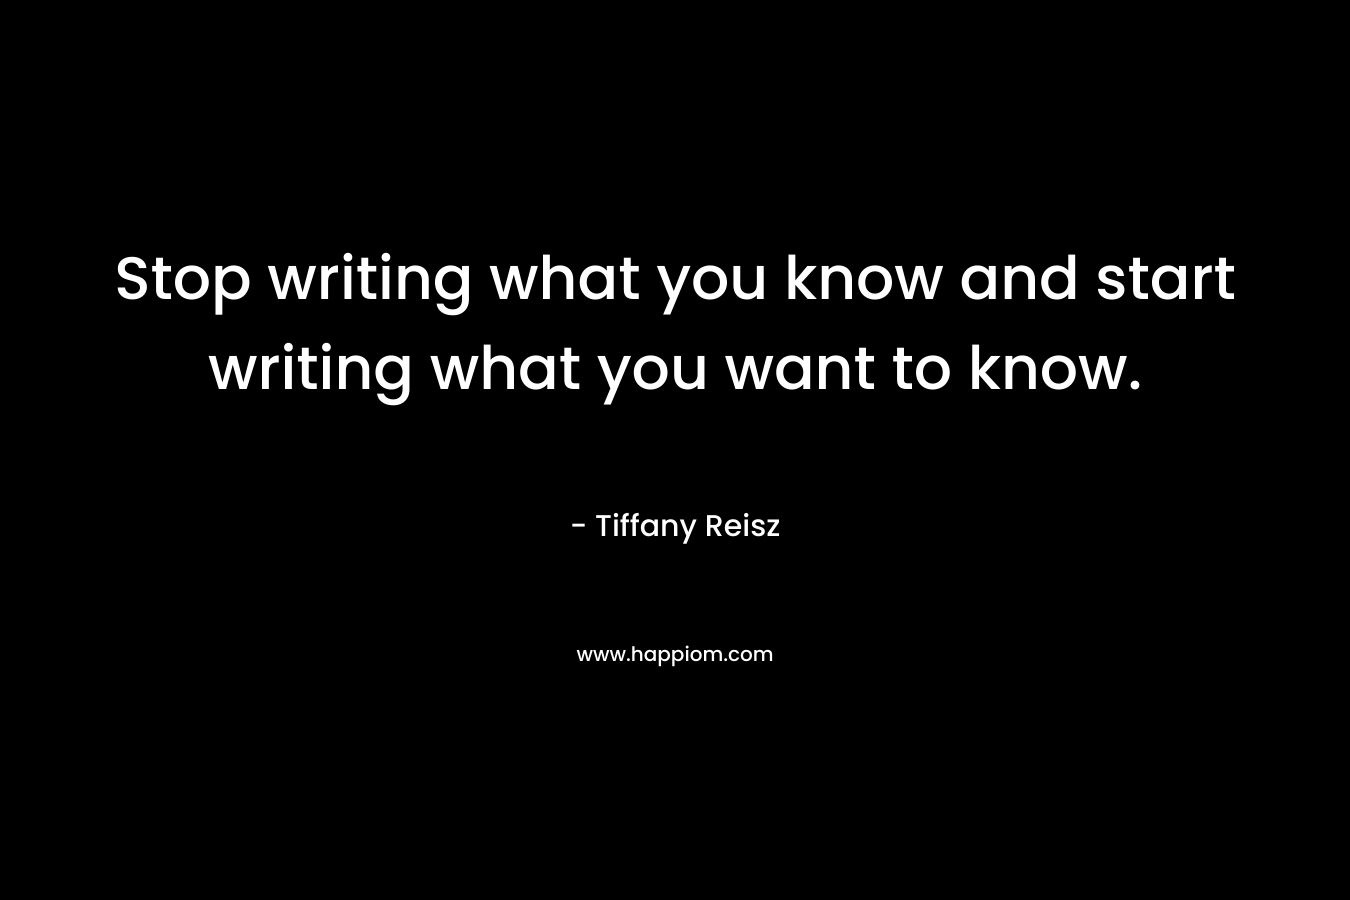 Stop writing what you know and start writing what you want to know.